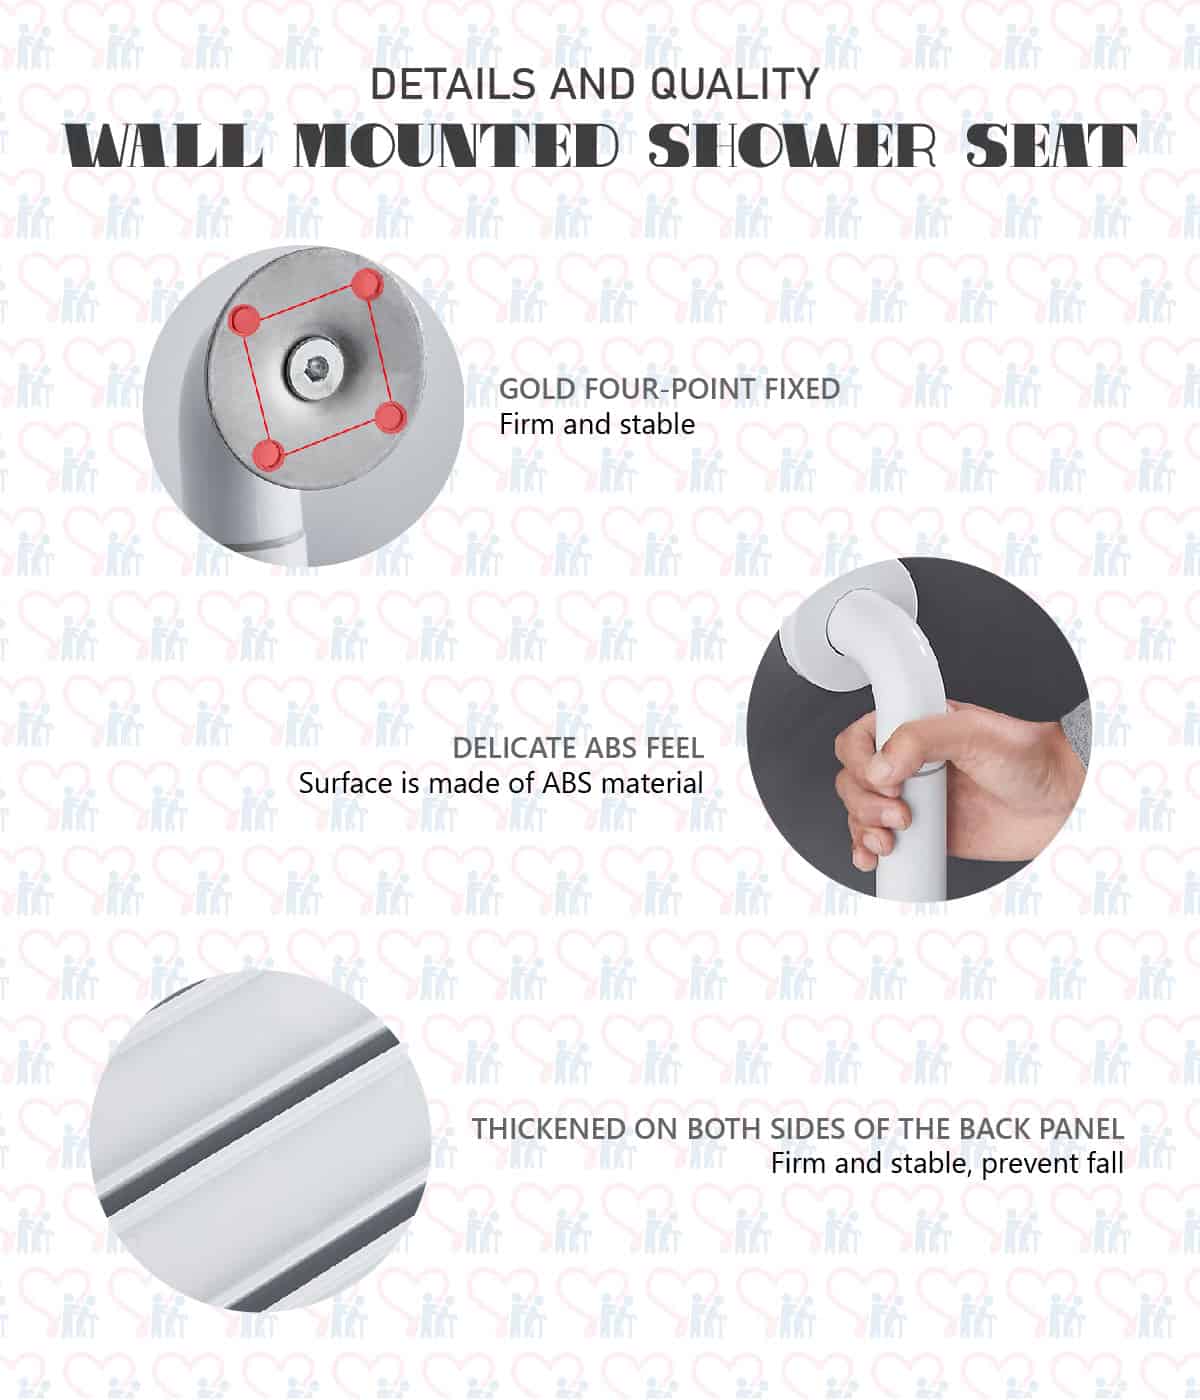 Wall Mounted Shower Seat - Double Armrest Quality